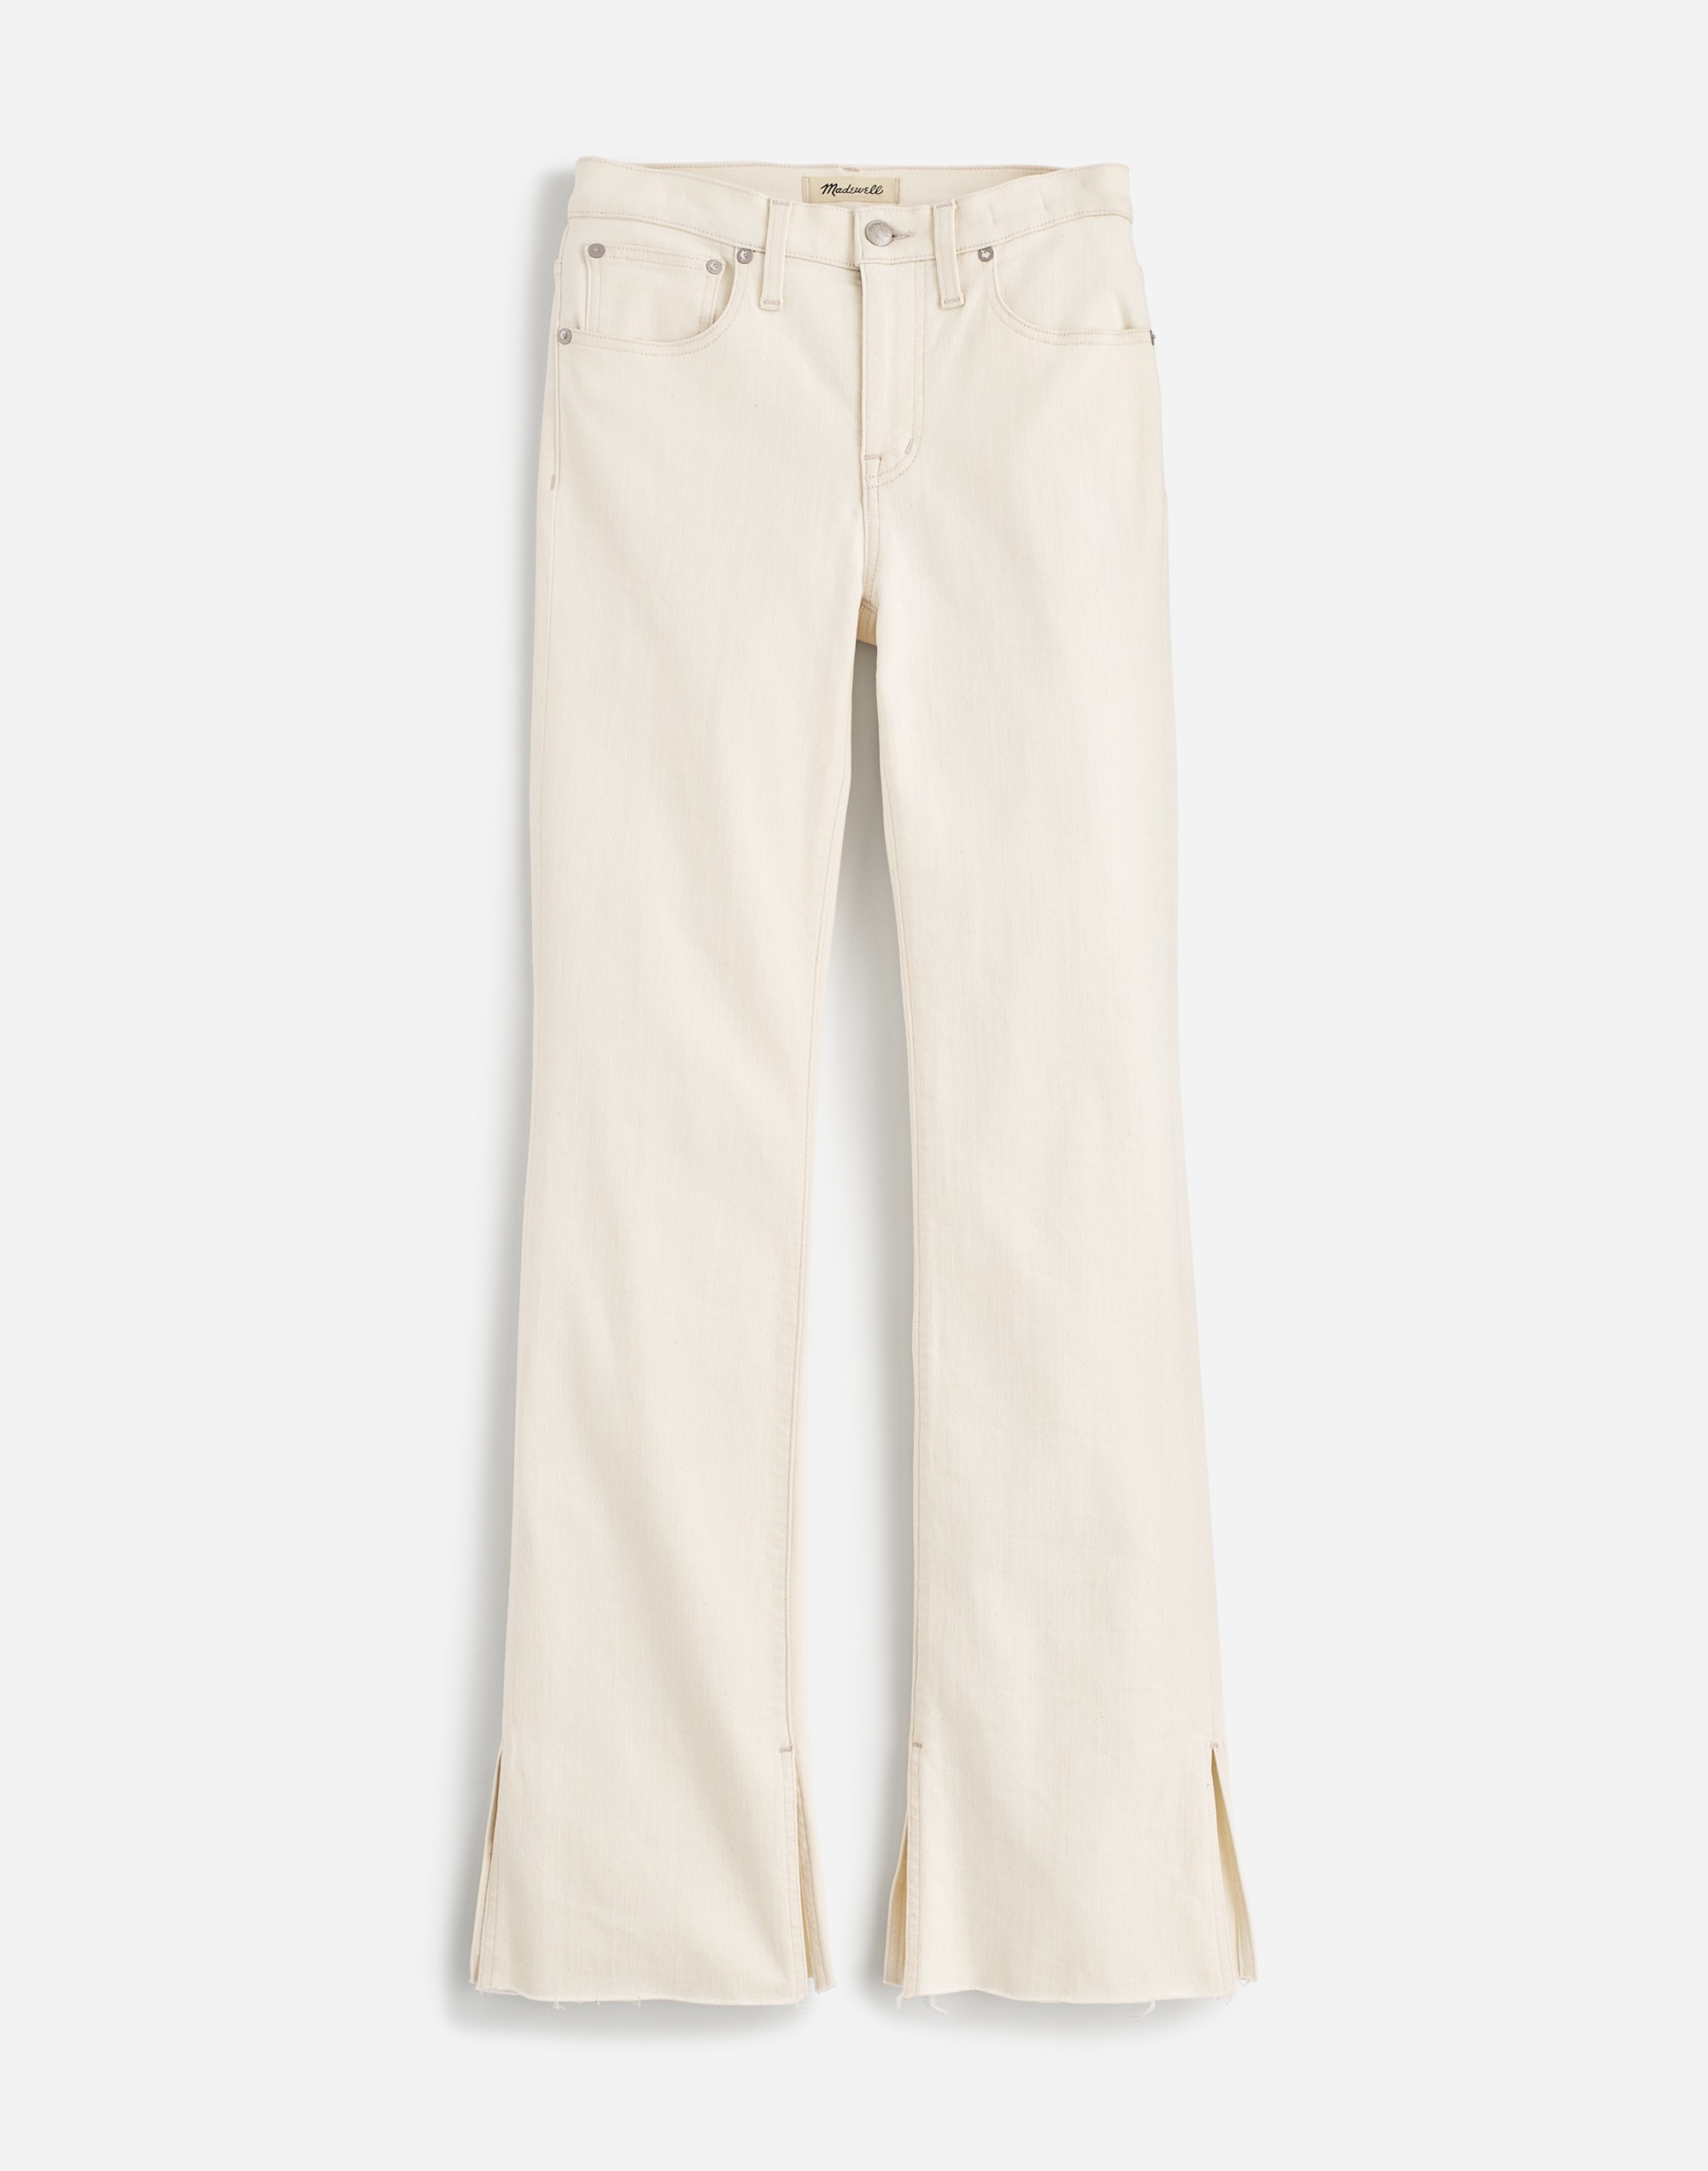 Kick Out Full-Length Jeans Vintage Canvas: Raw-Hem Edition